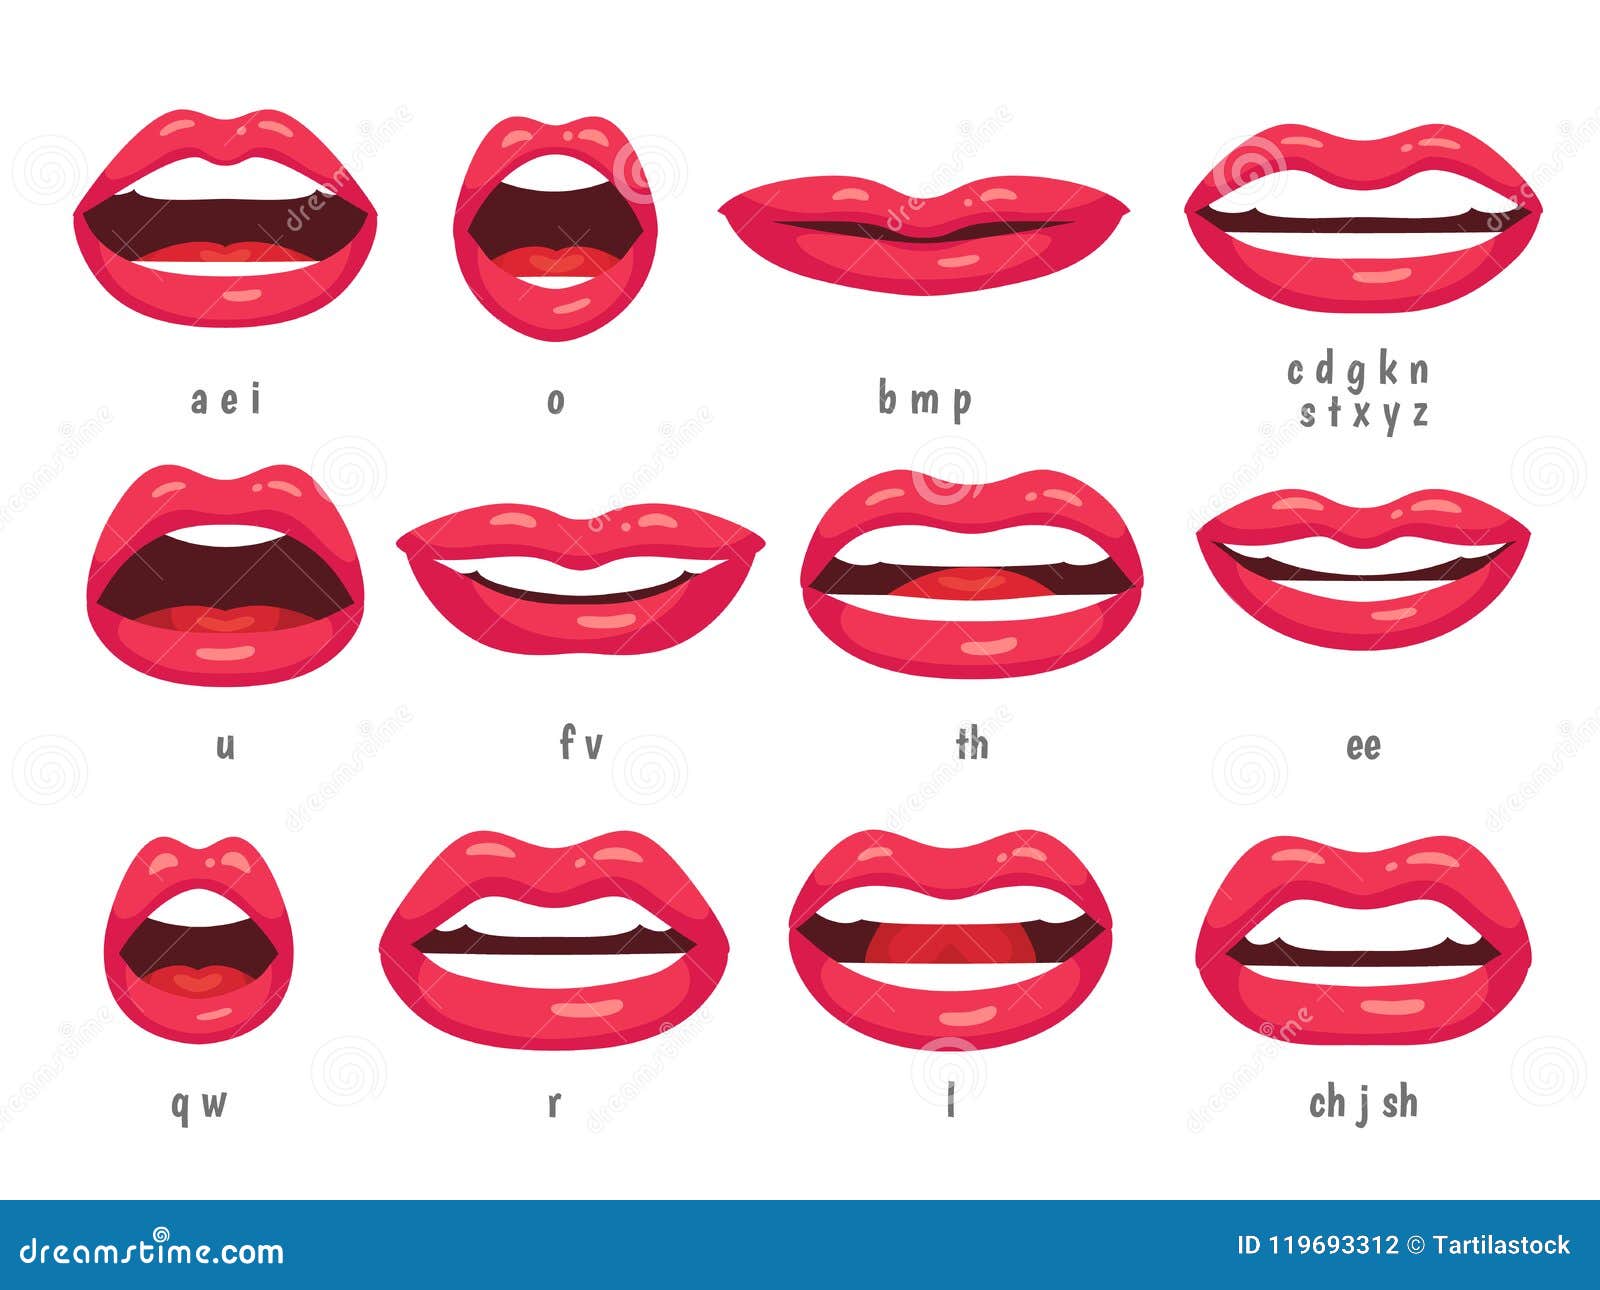 Mouth Animation. Lip Sync Animated Phonemes for Cartoon Woman Character.  Mouths with Red Lips Speaking Animations Vector Stock Vector - Illustration  of lips, poses: 119693312